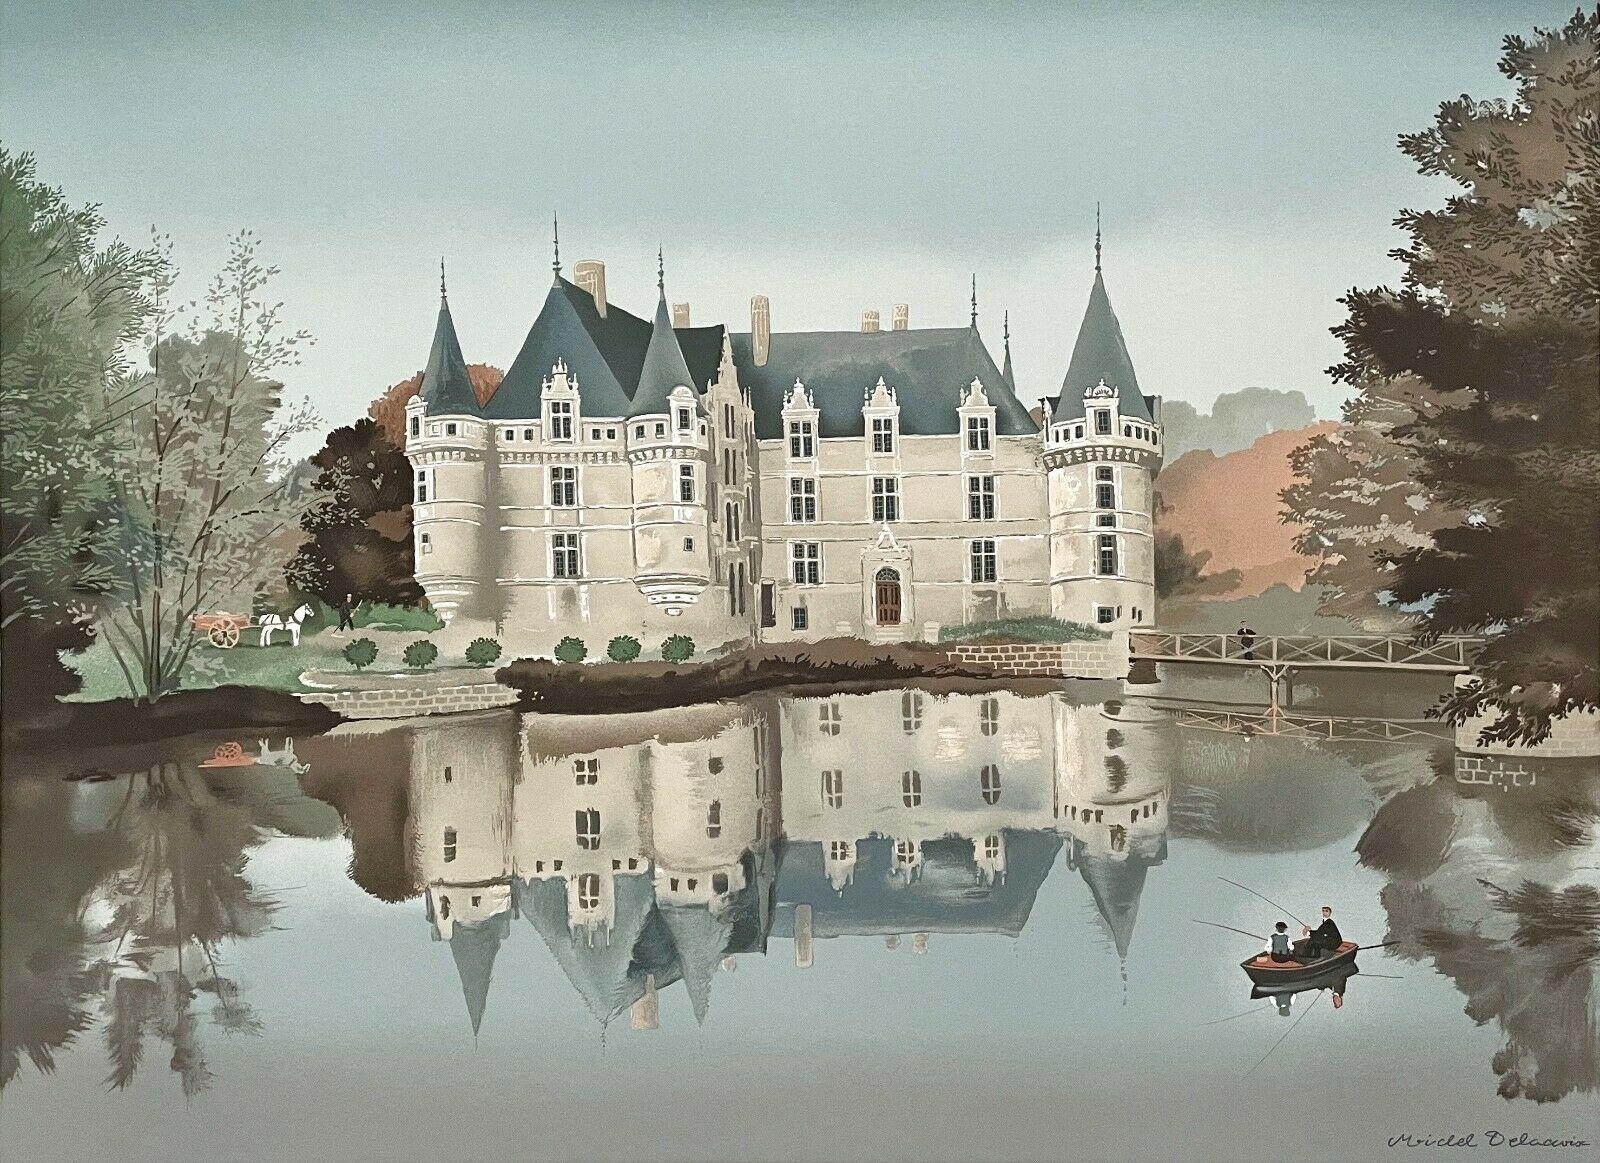 Artist: Michel Delacroix (1933)
Title: Azay le Rideau
Year: 1988
Medium: Stone lithograph on wove paper
Inscription: Stone signed with the artist’s signature
Size: 28 x 30 inches
Condition: Excellent
Notes: Published by Lublin Graphics

MICHEL